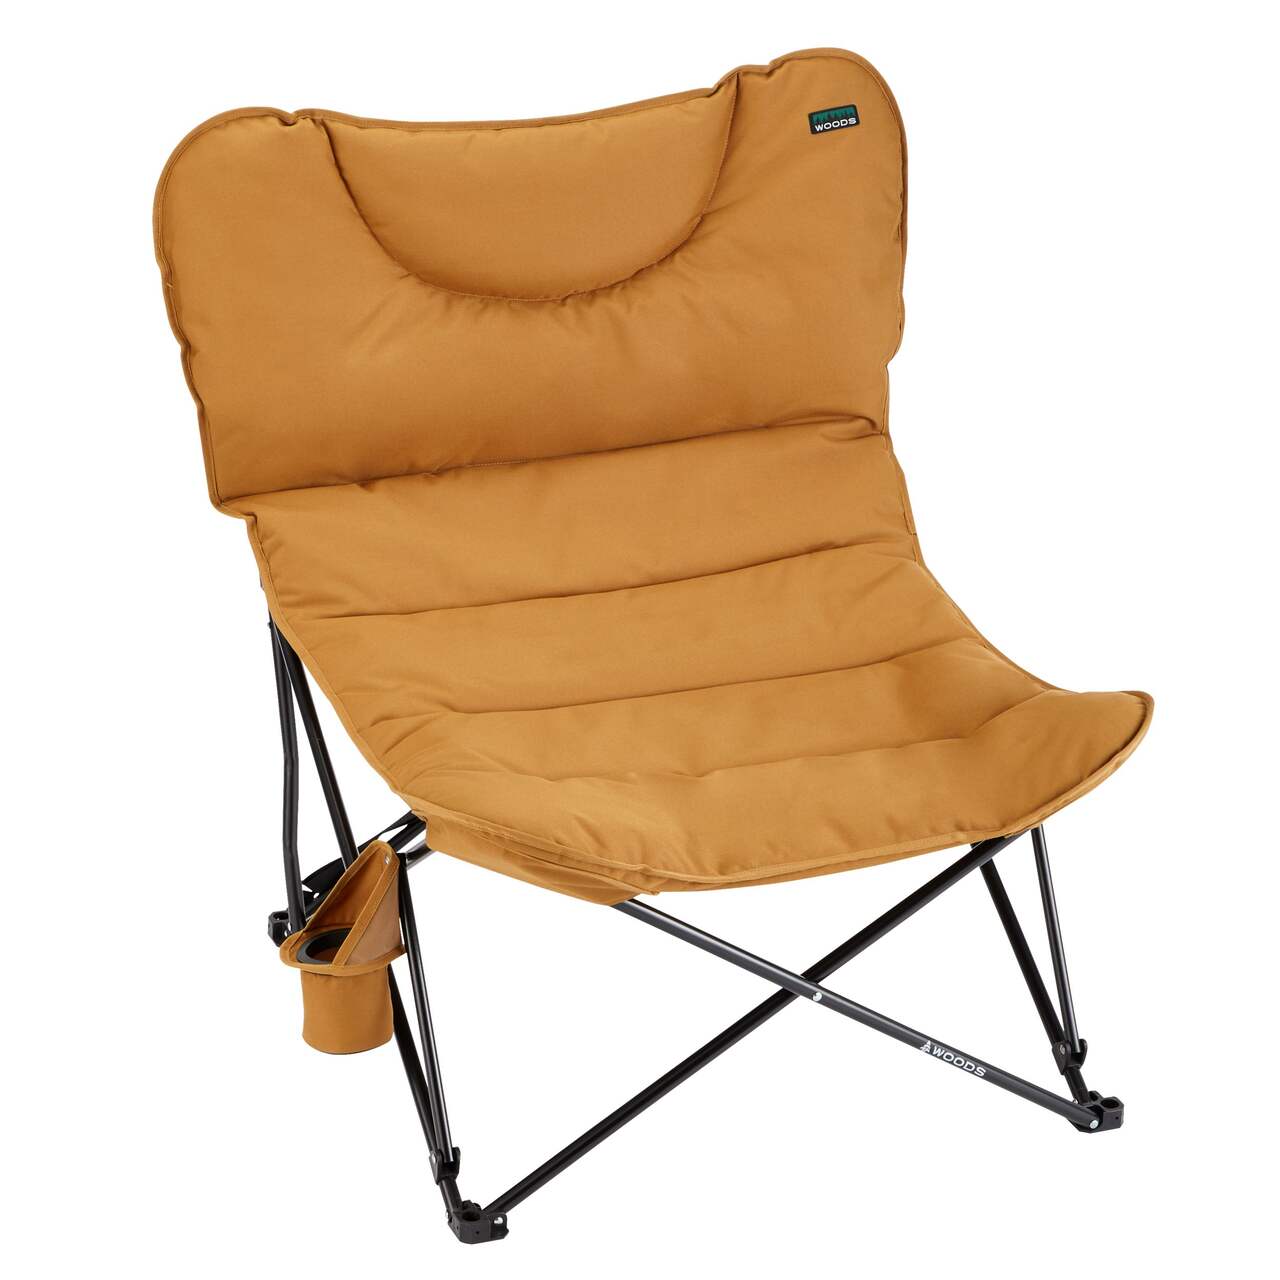 Woods Mammoth Padded Oversized Portable Folding Camping Quad Chair w/ Cup  Holder & Carry Bag, Dijon